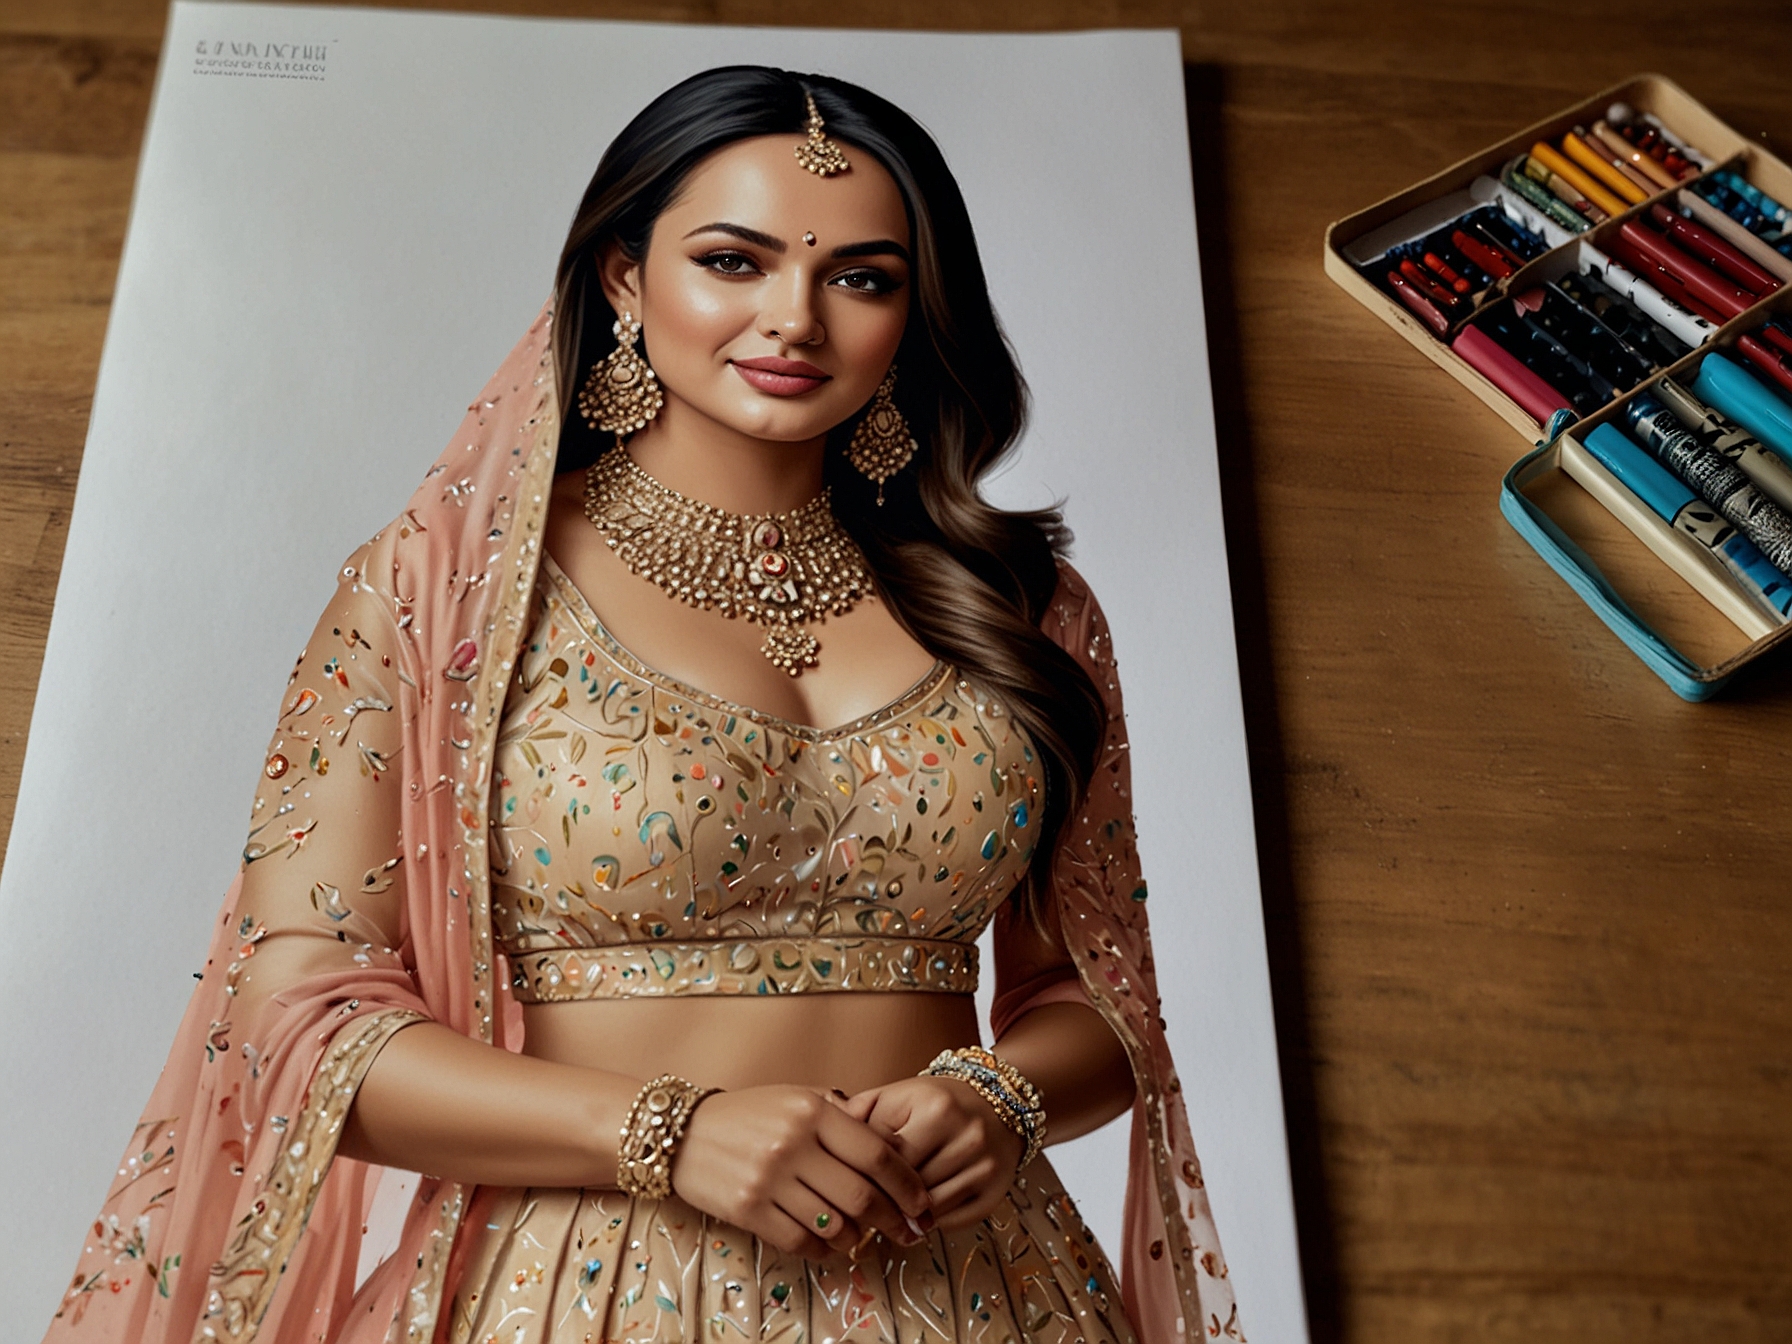 Sonakshi Sinha stuns in a pastel lehenga with intricate embroidery, paired with statement jewelry and minimal makeup, perfect for pre-wedding celebrations or grand events.